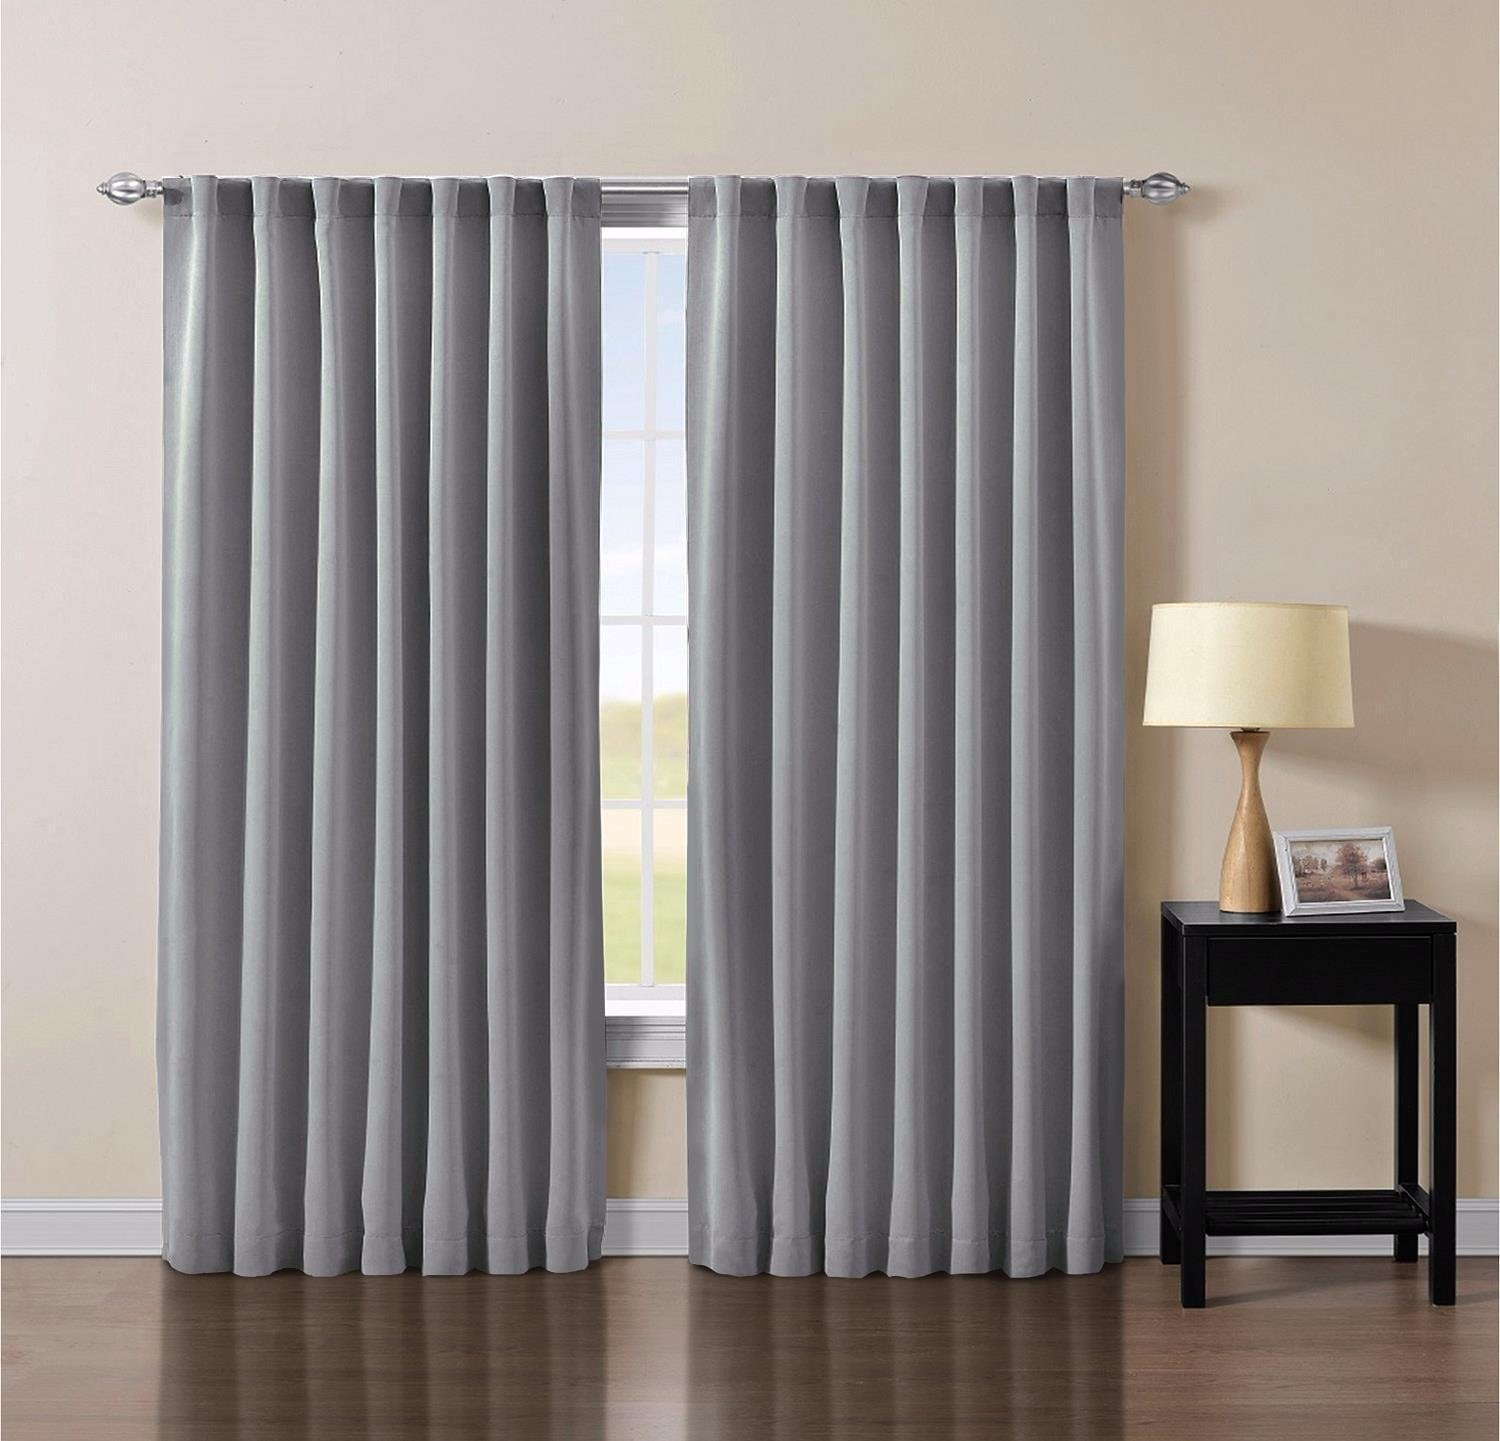 2-Panels Solid Back Tab Thermal Insulated Blackout Window Curtain 84"L